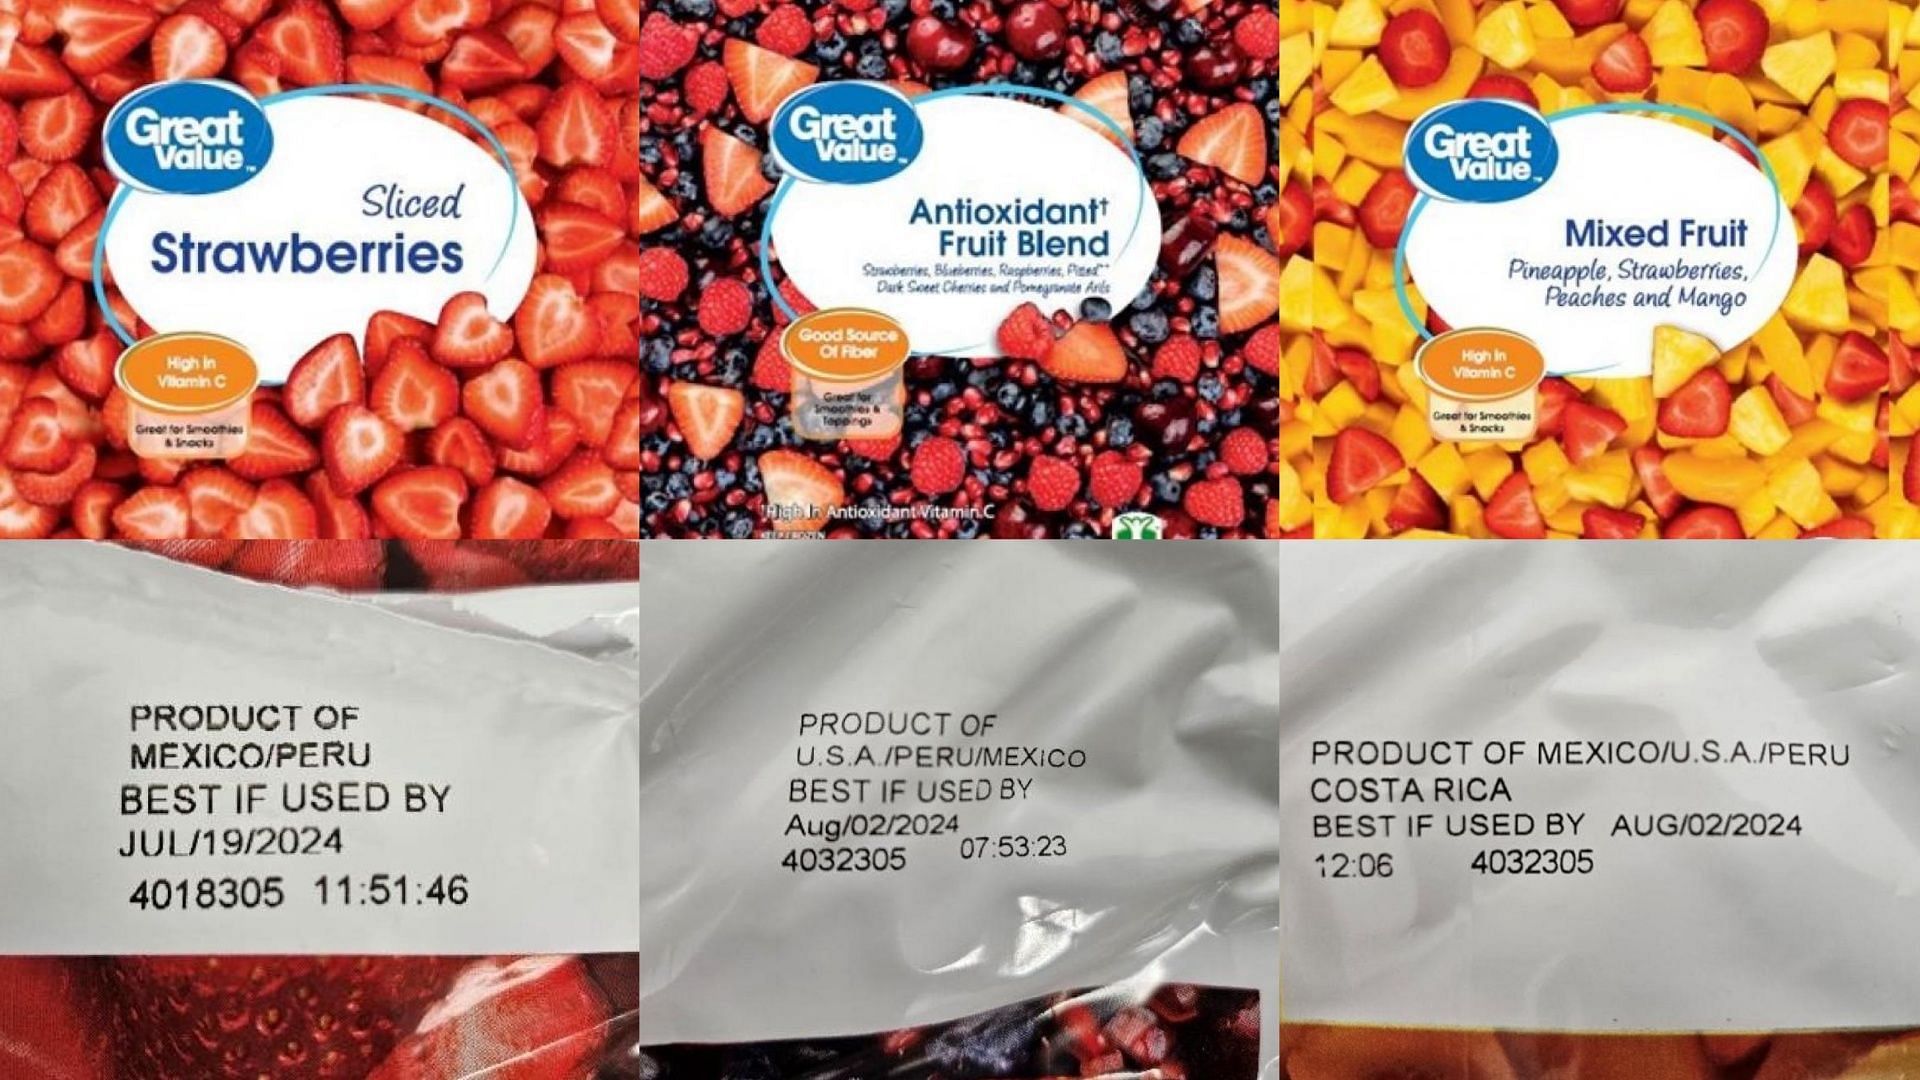 Some of the recalled Great Value frozen fruit products may be contaminated with Hepatitis A (Image via FDA)